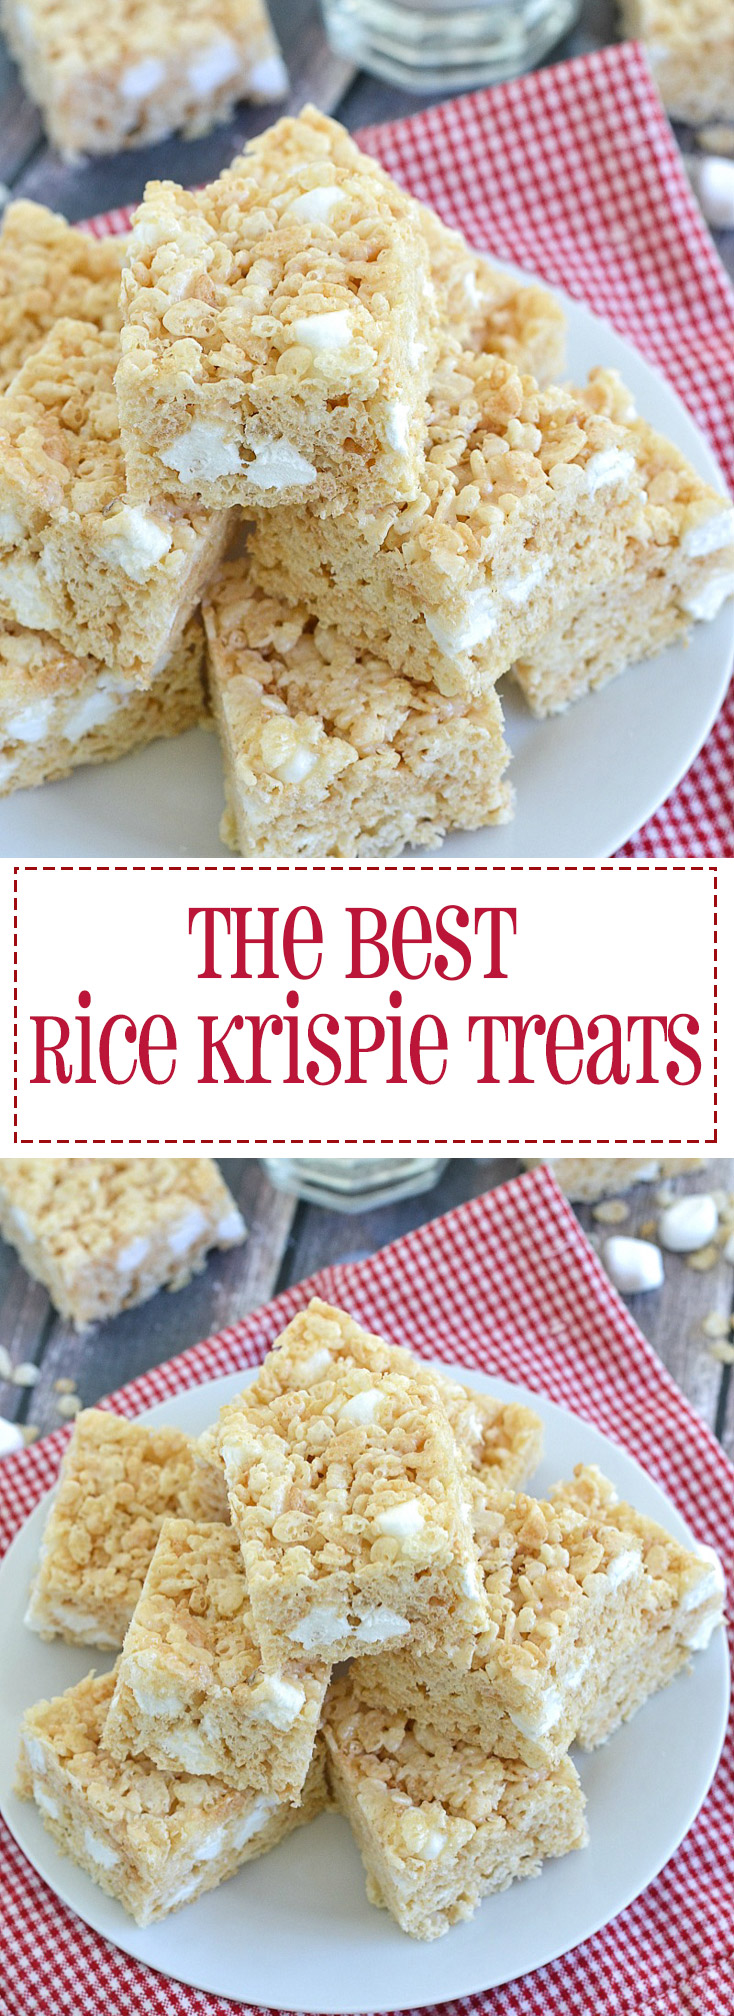 Soft, thick and chewy rice krispie treats. Seriously the best recipe! www.motherthyme.com